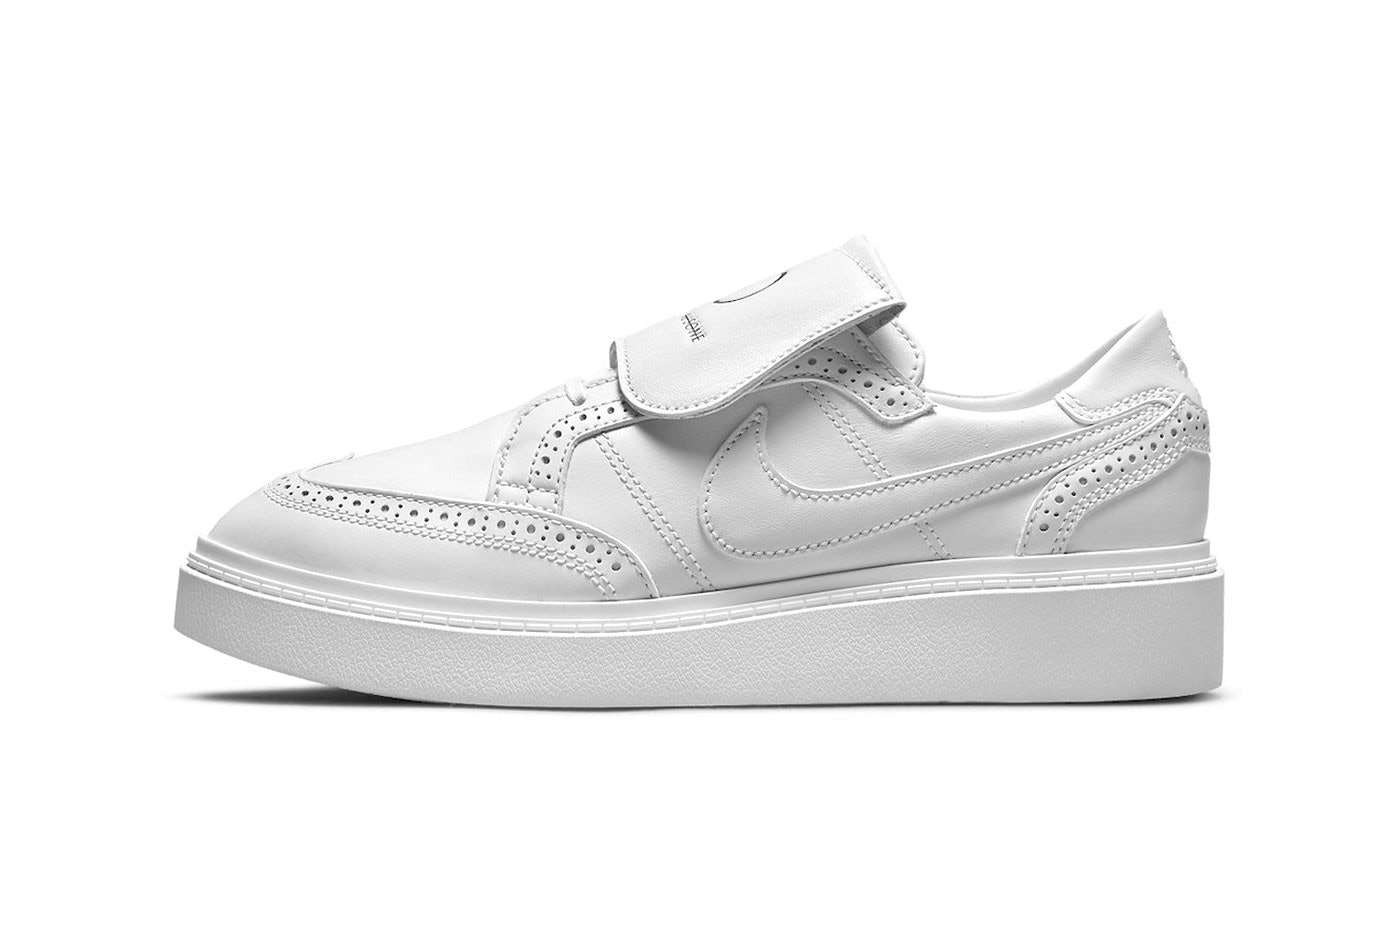 Nike made a sexy all-white dress shoe with G-Dragon, the 'King of 